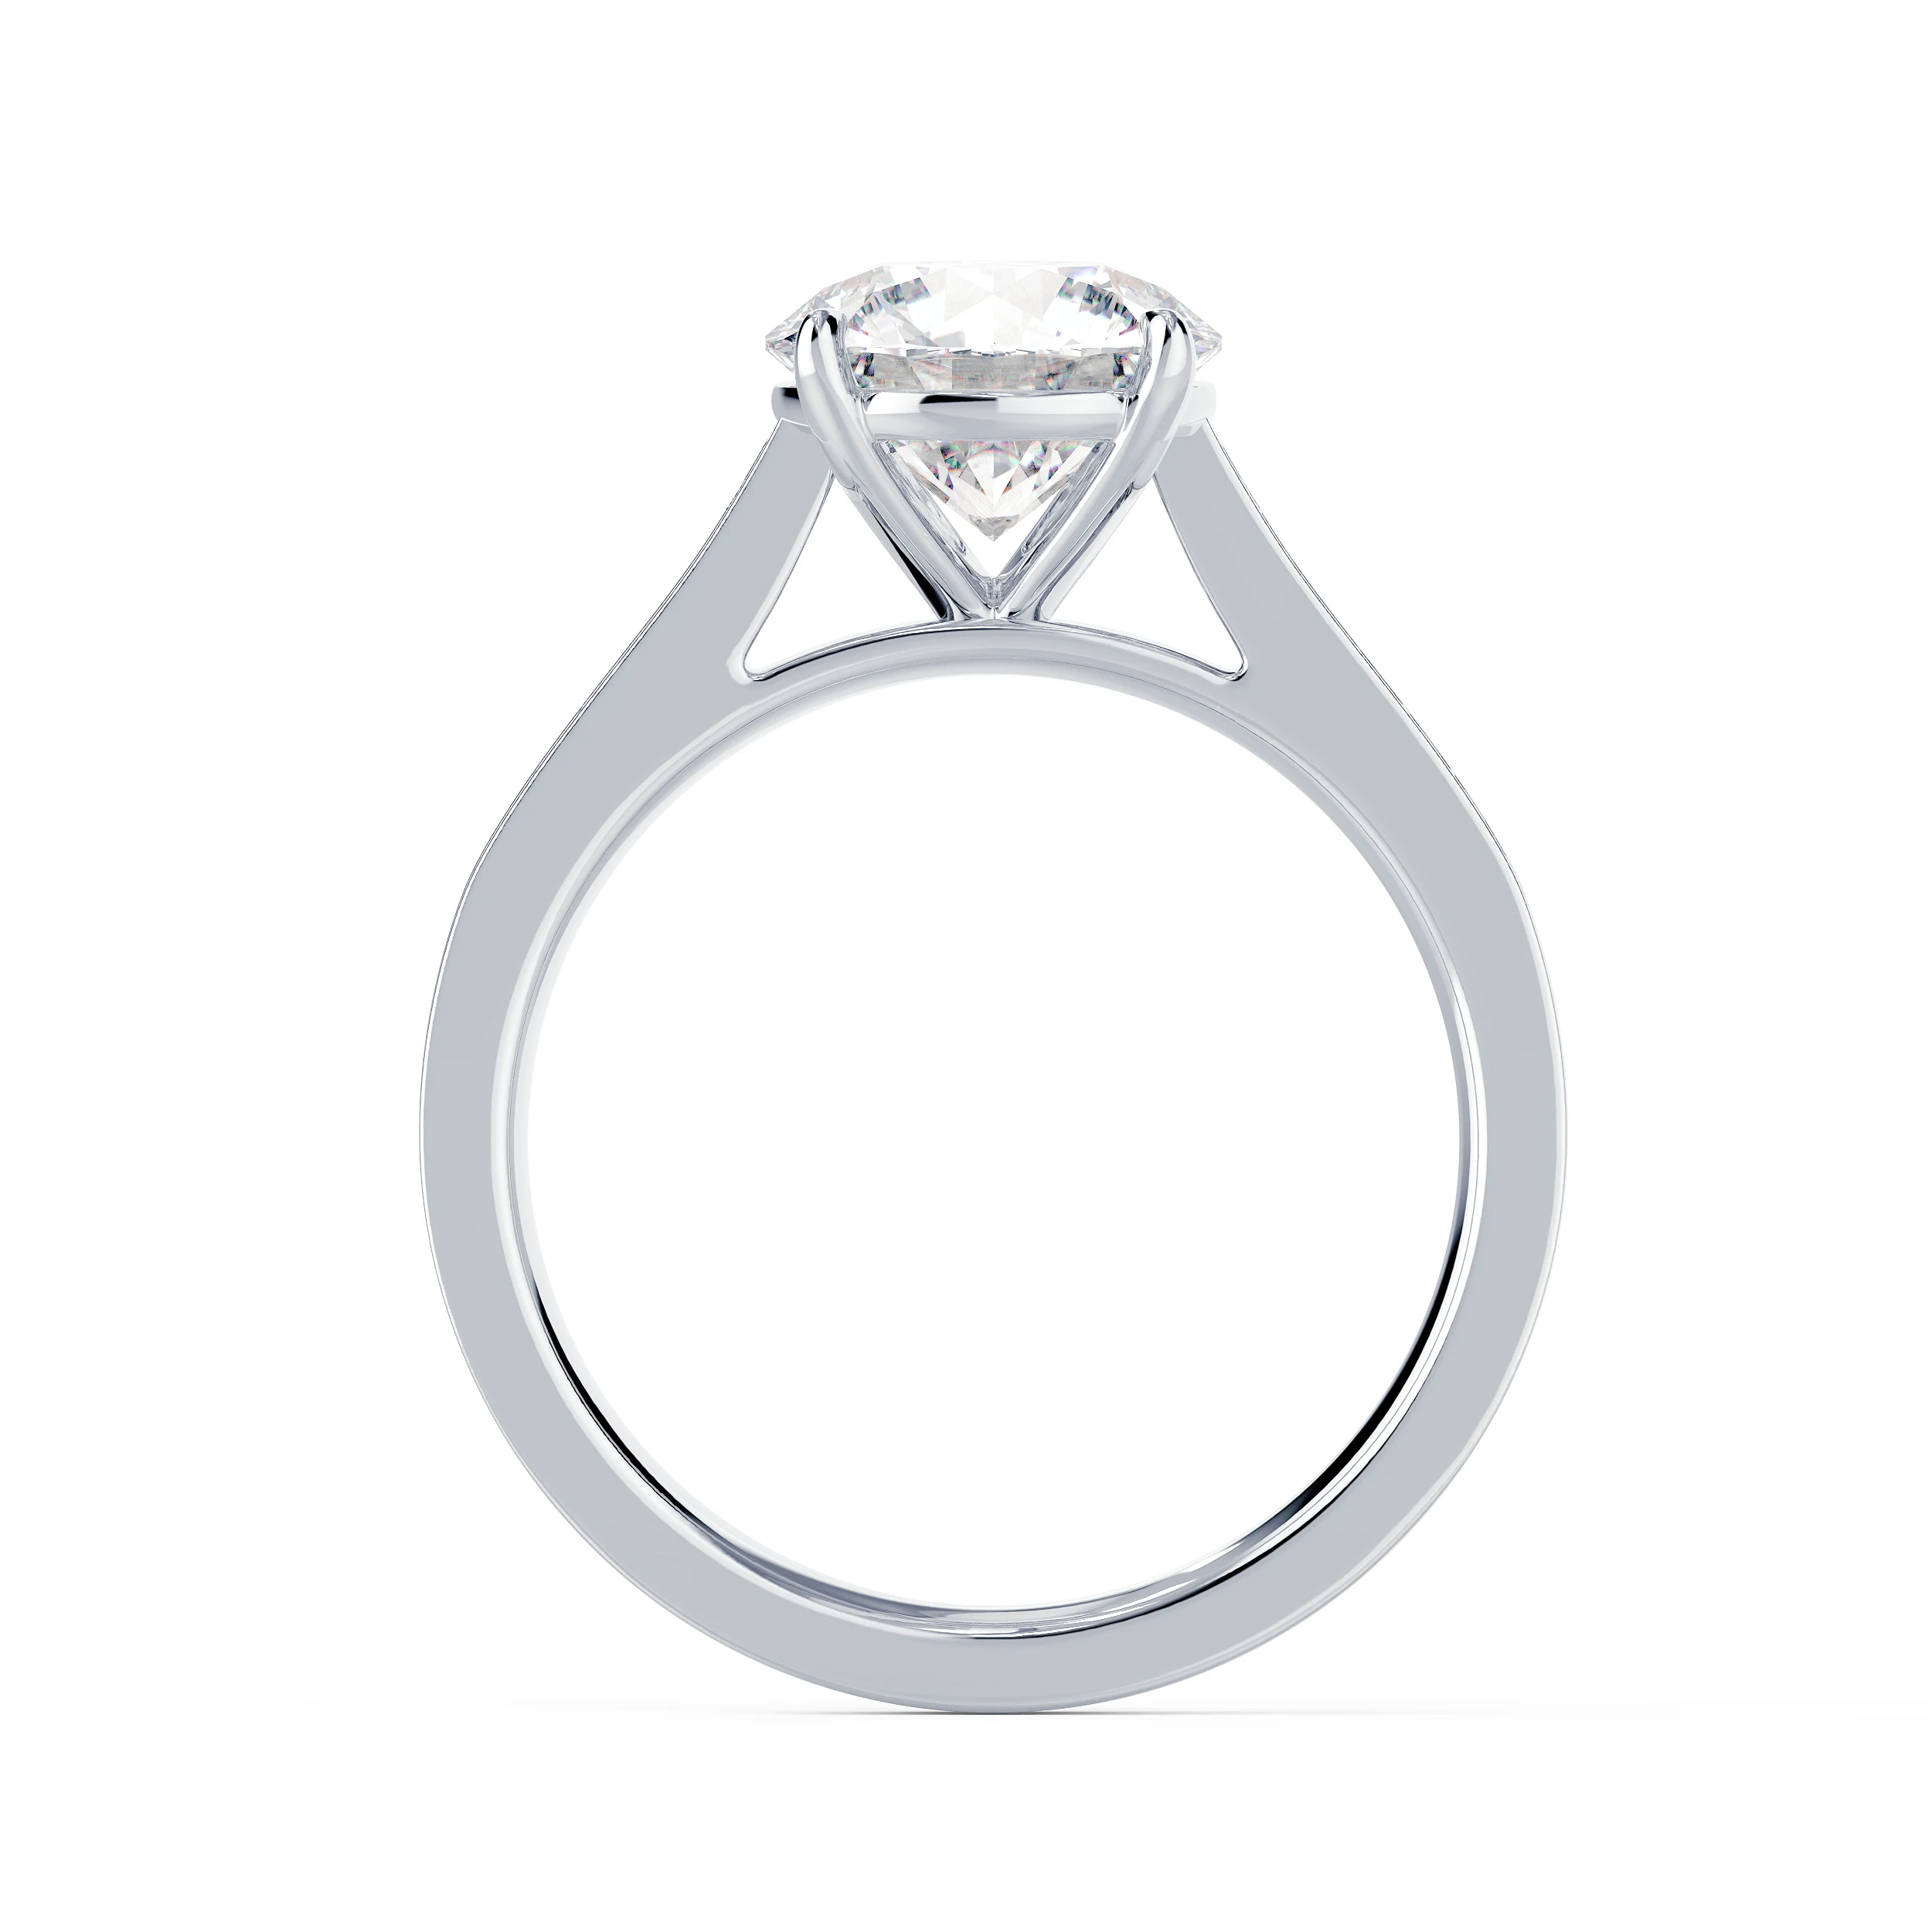 White Gold Channel Setting featuring Lab Grown Diamonds (Profile View)